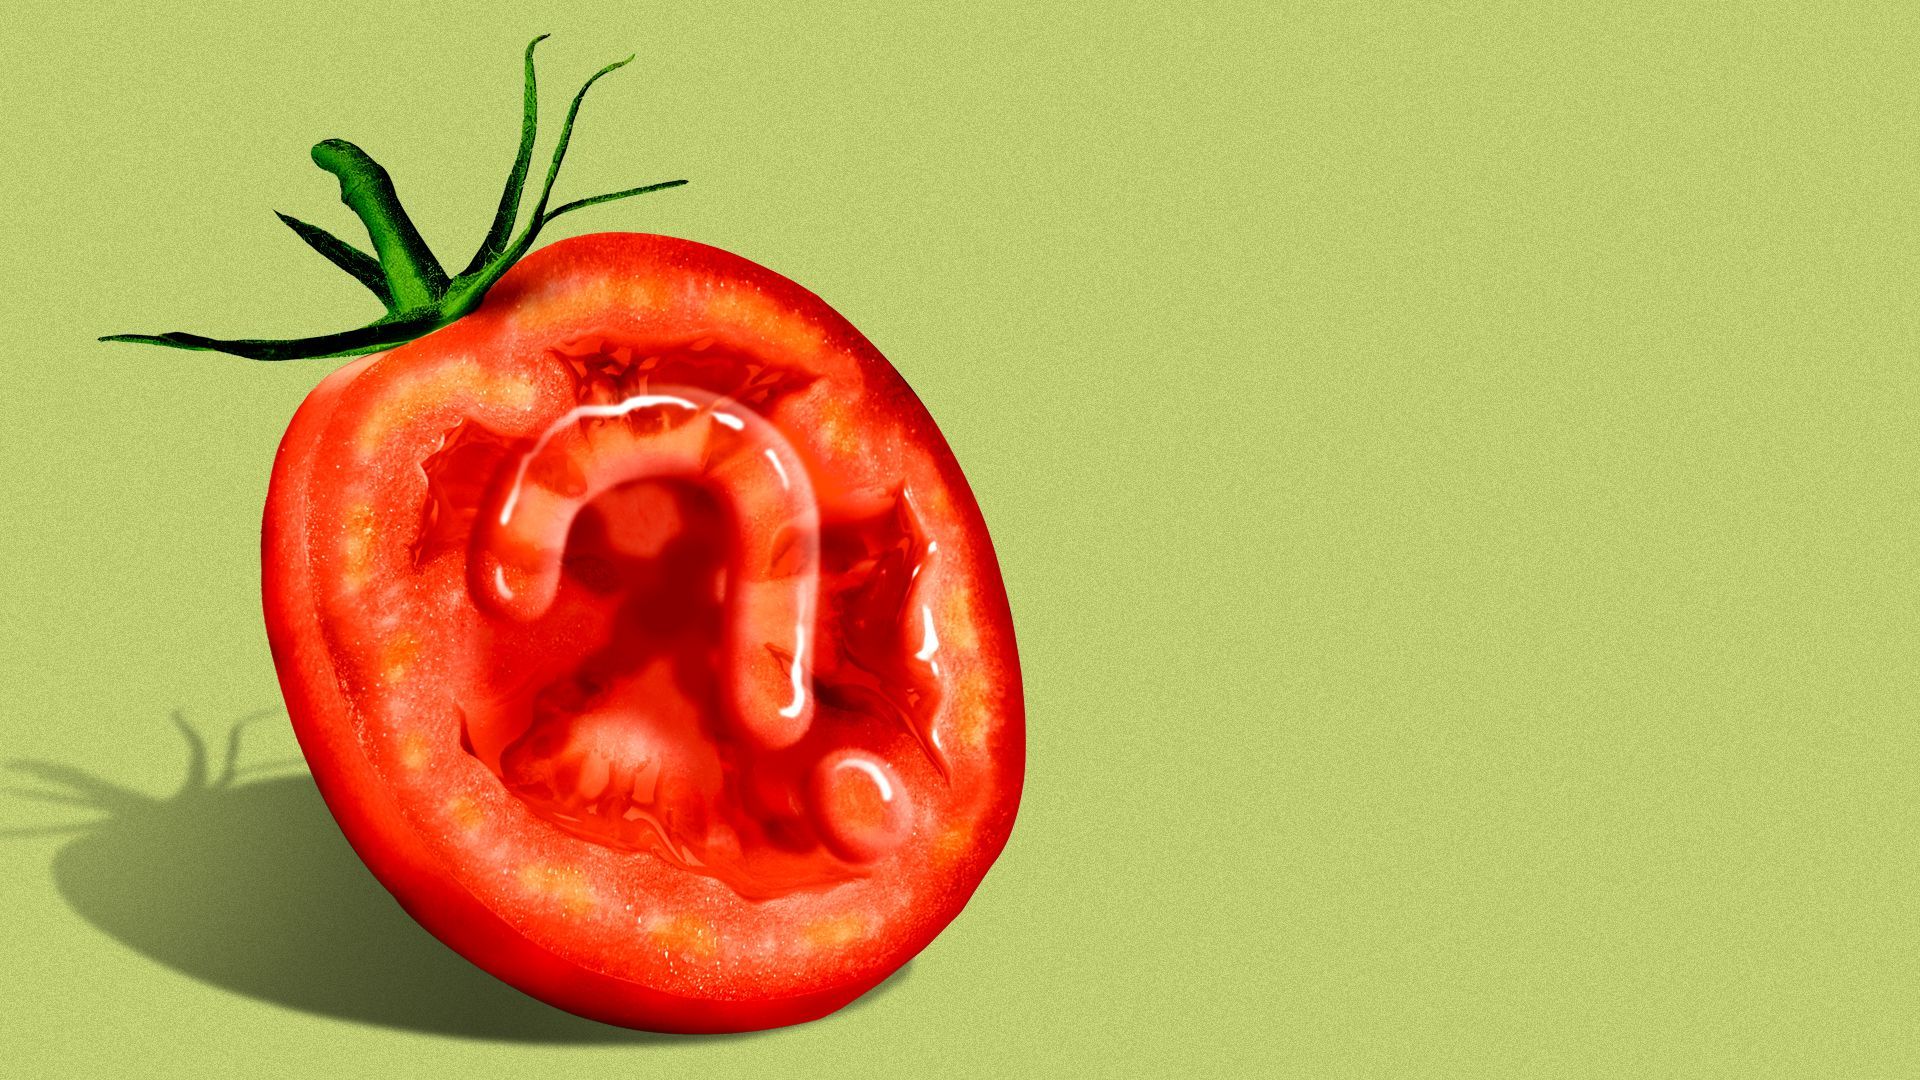 Illustration of a sliced tomato with a question mark in the middle